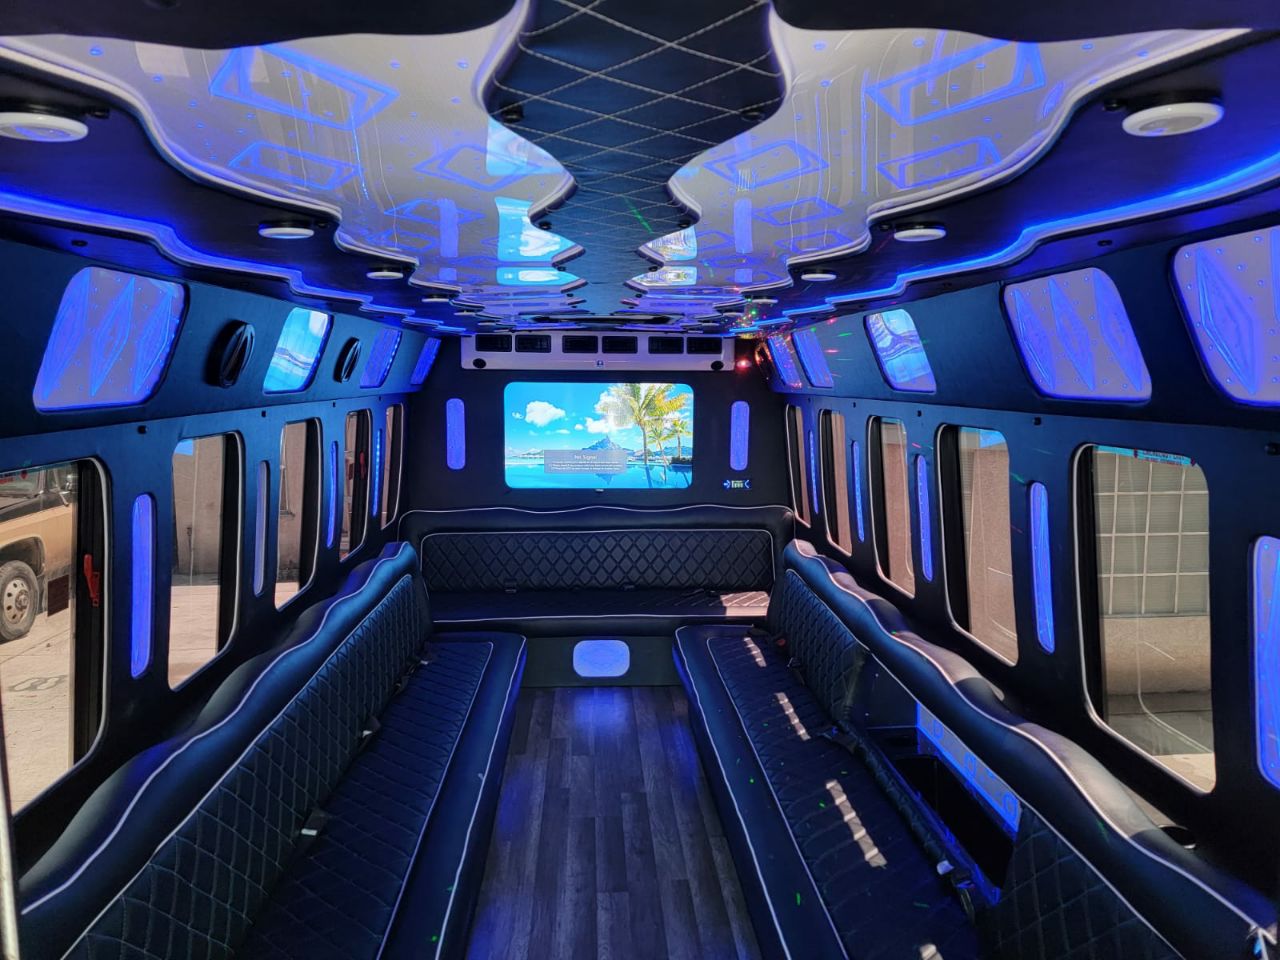 Do You Require a Party Bus for Your New Years Eve Get-Together?